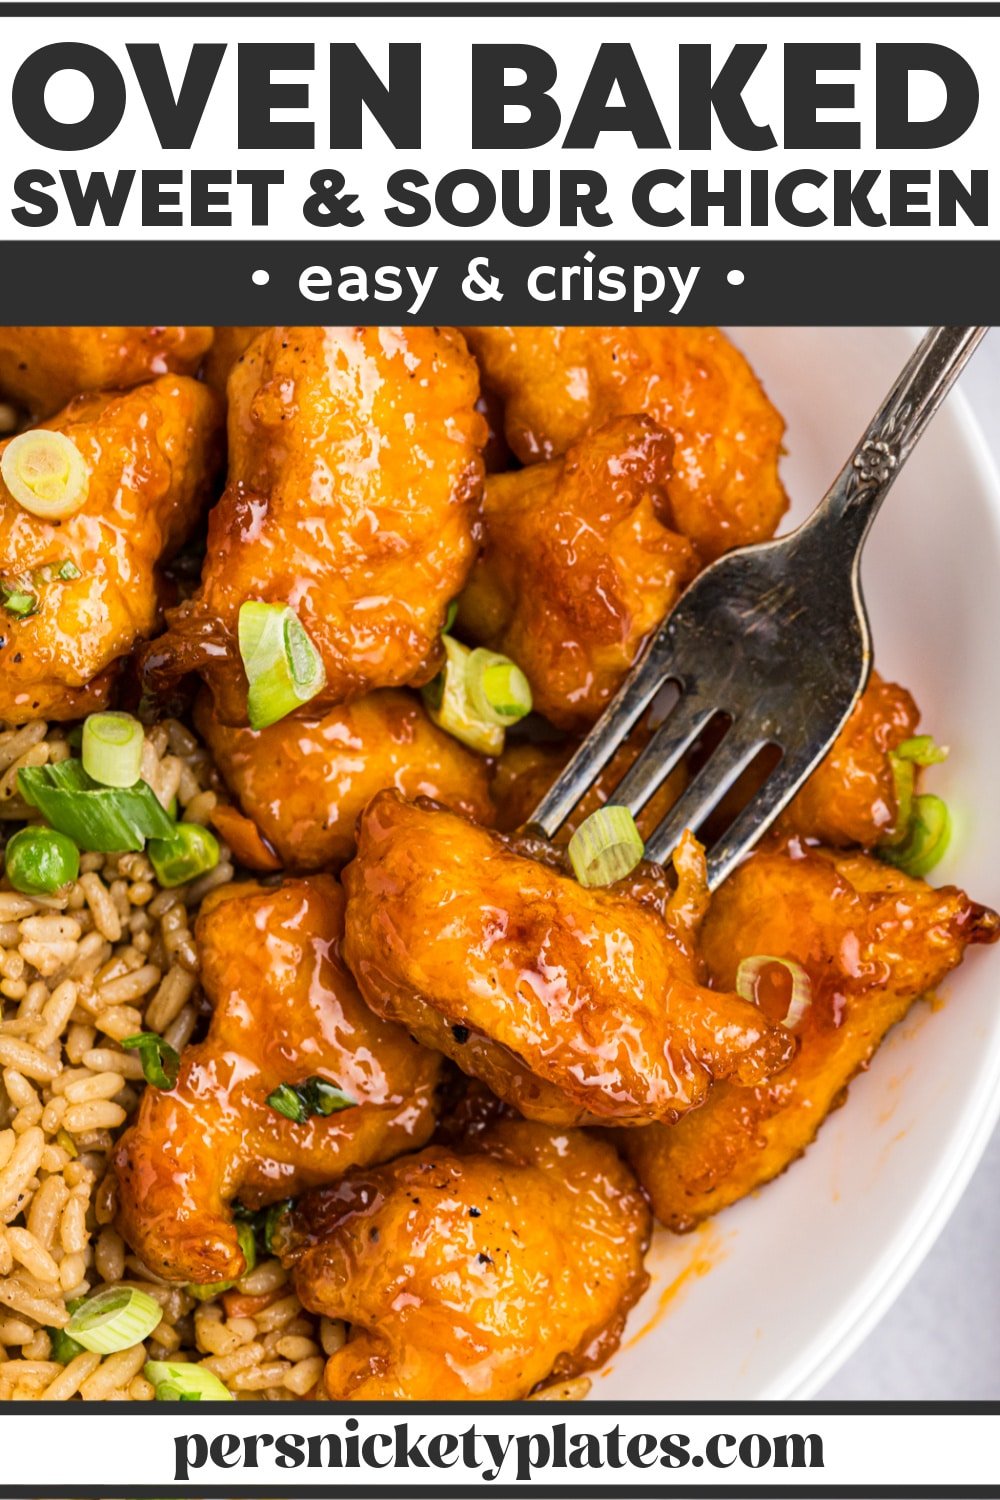 Baked sweet and sour chicken is made with a light crispy coating smothered in a sweet, sour, and slightly sticky sauce and baked until perfectly crisped on the outside and tender on the inside. Serve with your favorite sides and have delicious take-out without leaving home! | www.persnicketyplates.com